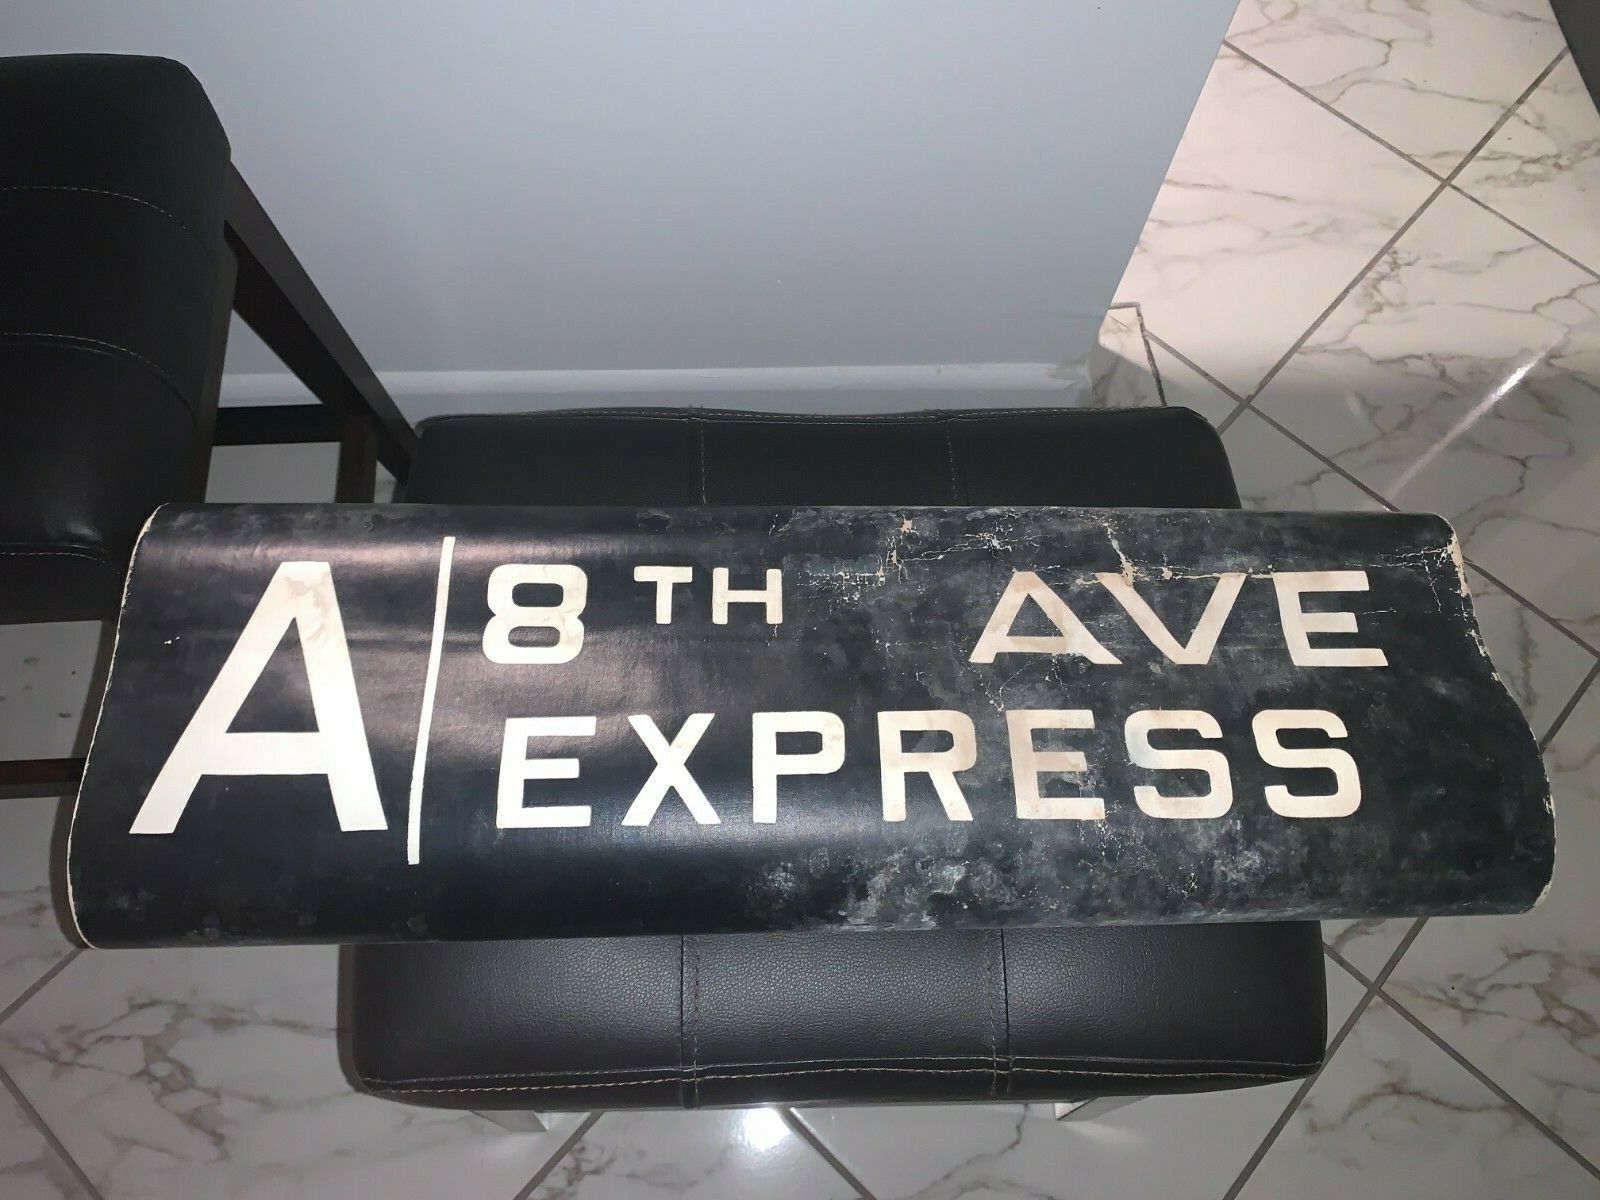 PRIMITIVE NY NYC SUBWAY ROLL SIGN A 8th AVE EXPRESS 1961 BLEECKER HELLS KITCHEN